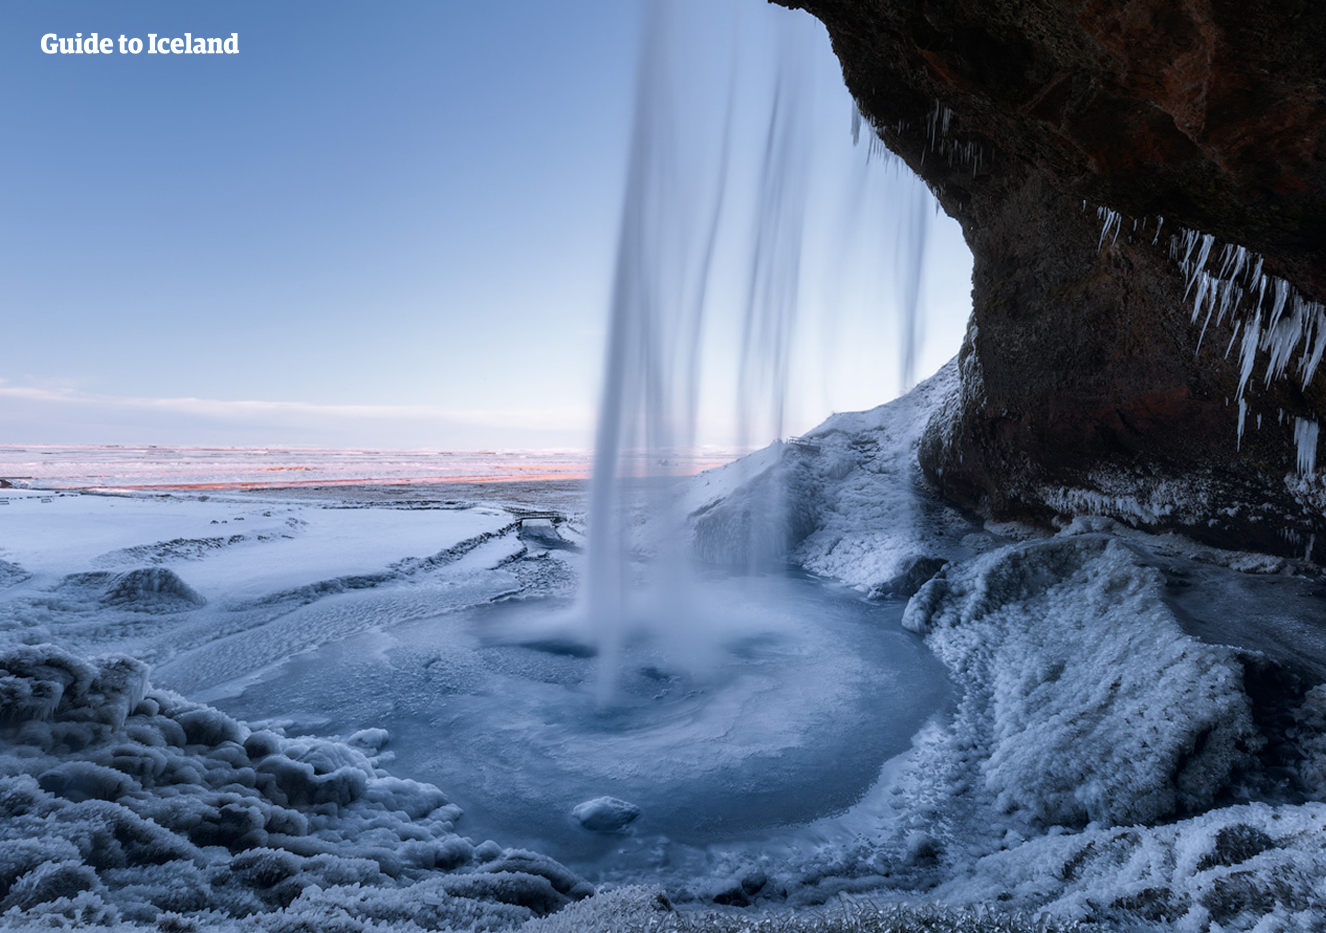 Enjoy the view from behind the falling springwater of Seljalandsfoss waterfall on the South Coast.